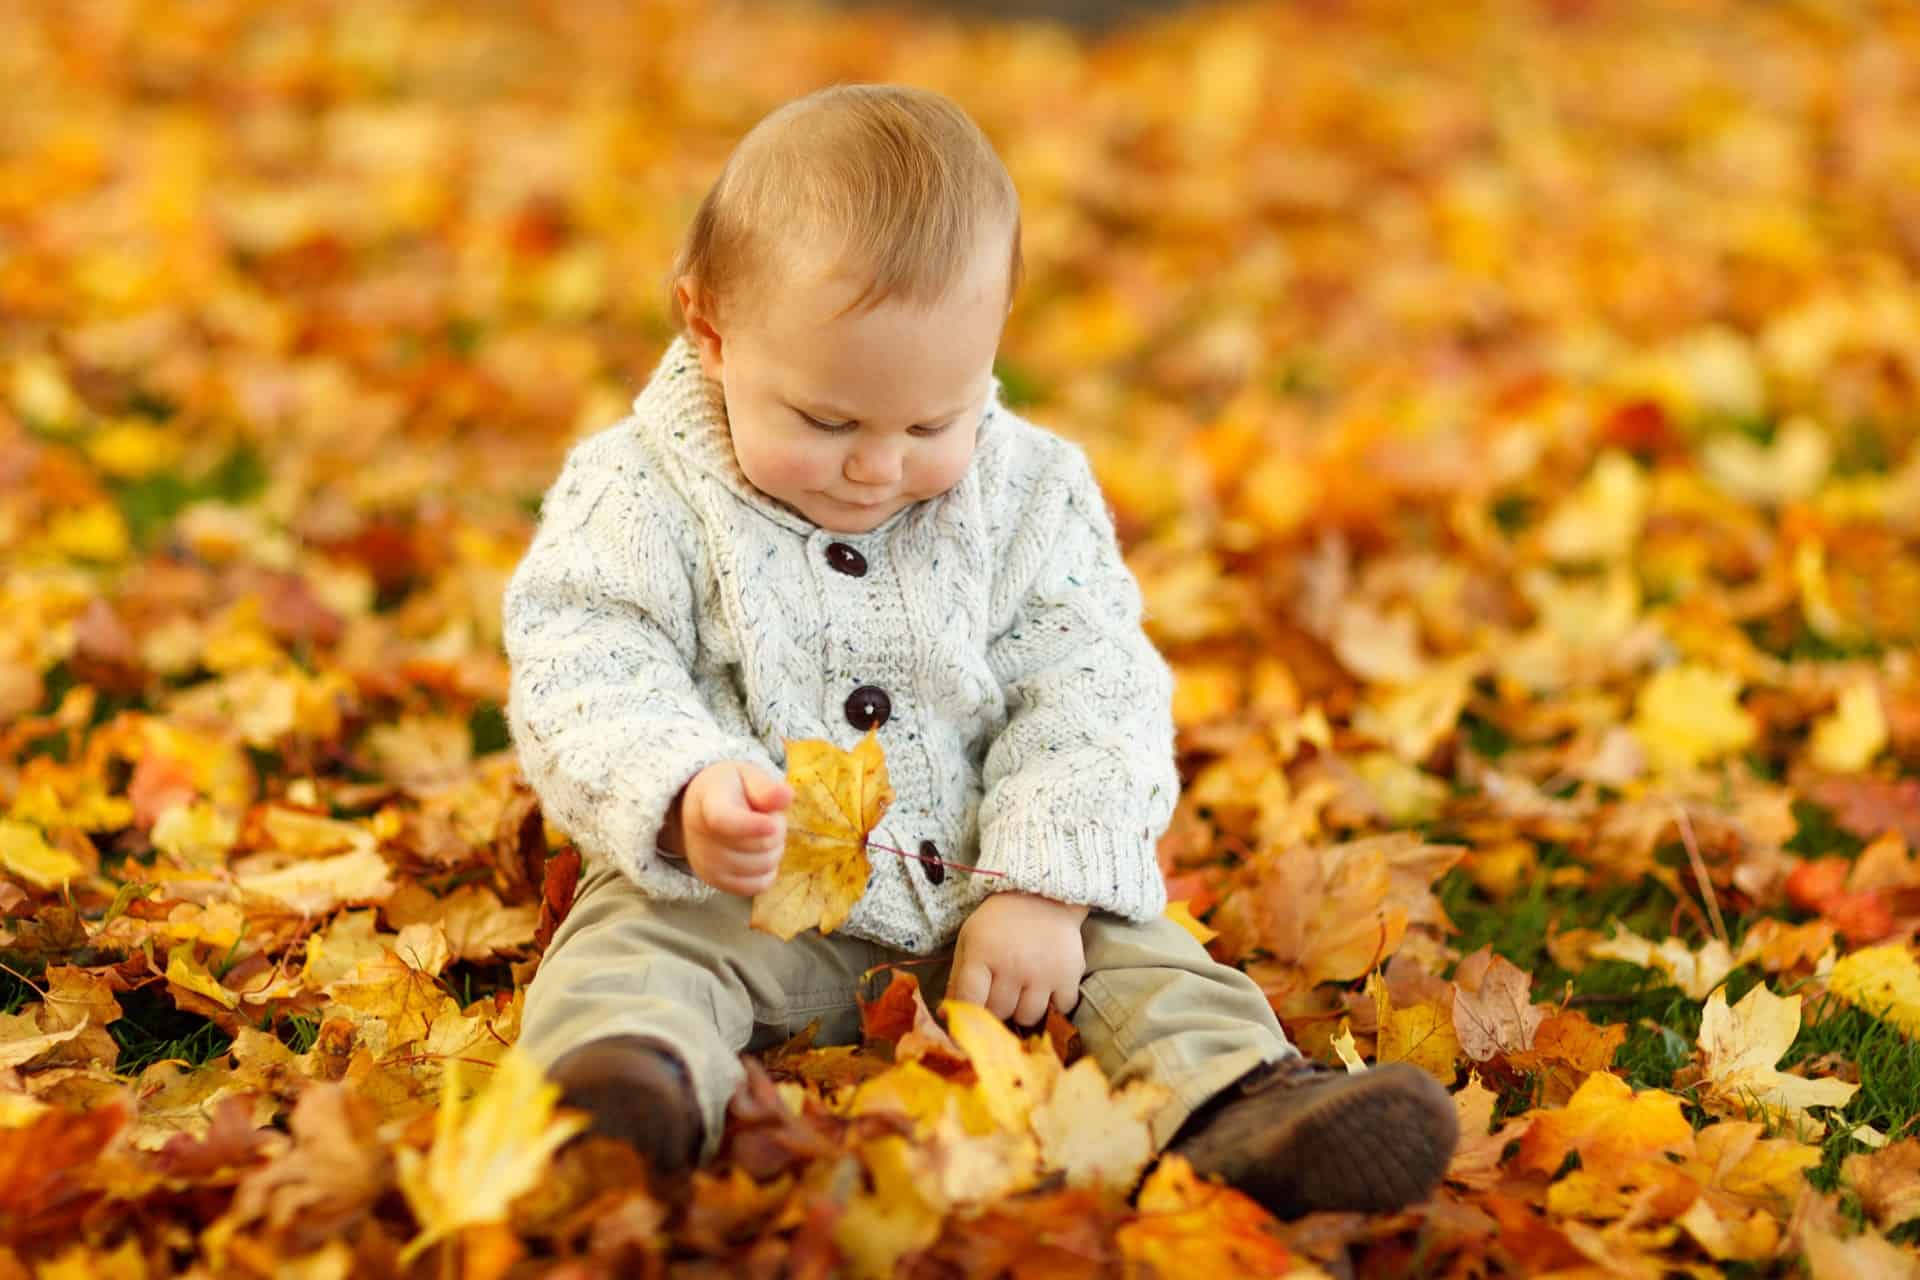 Autumn Toddler Learning